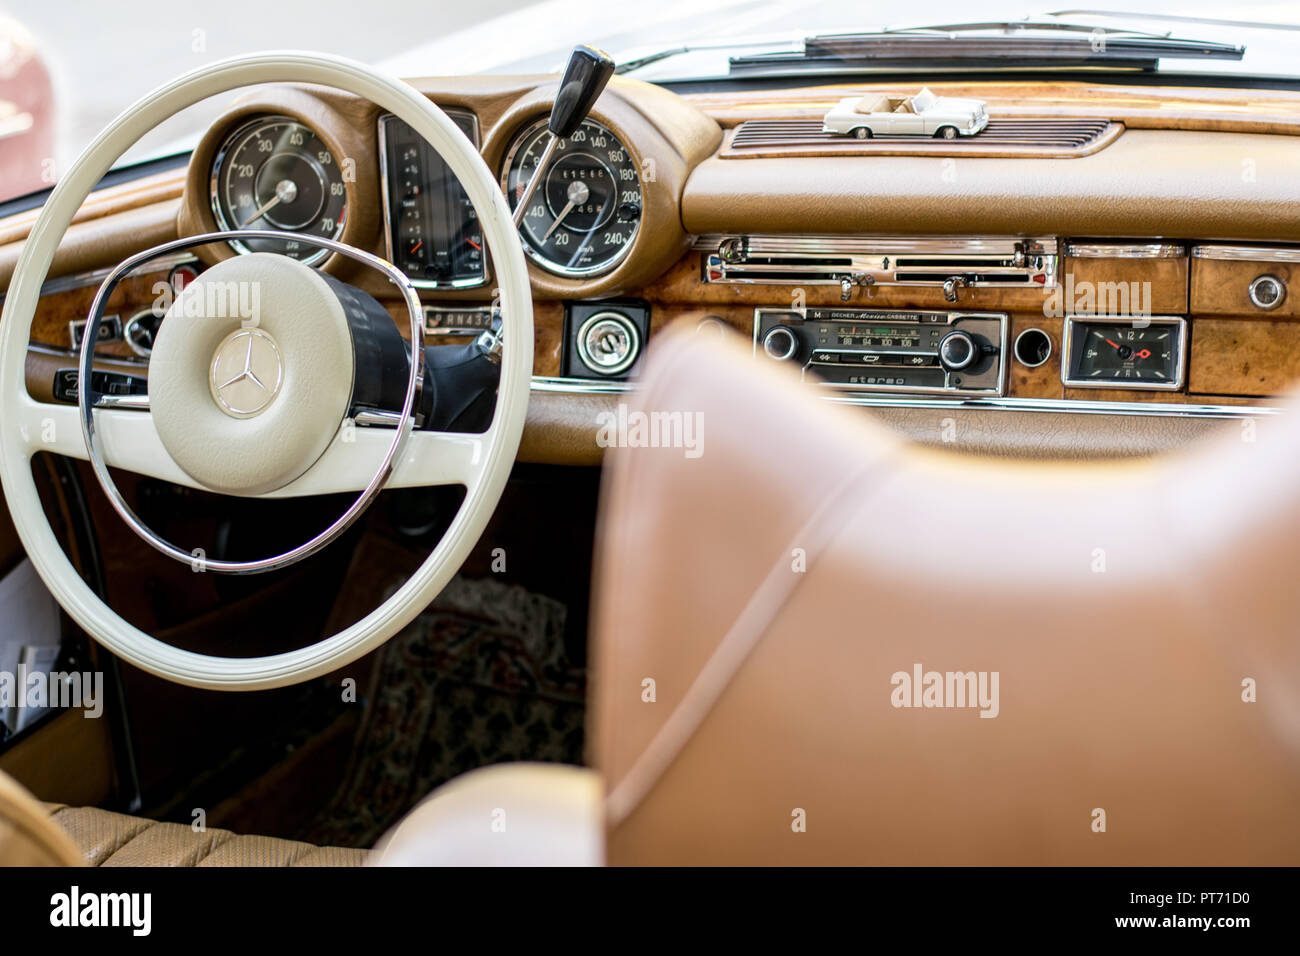 The Interior Of The Mercedes Oldtimer In A Beige And White Color